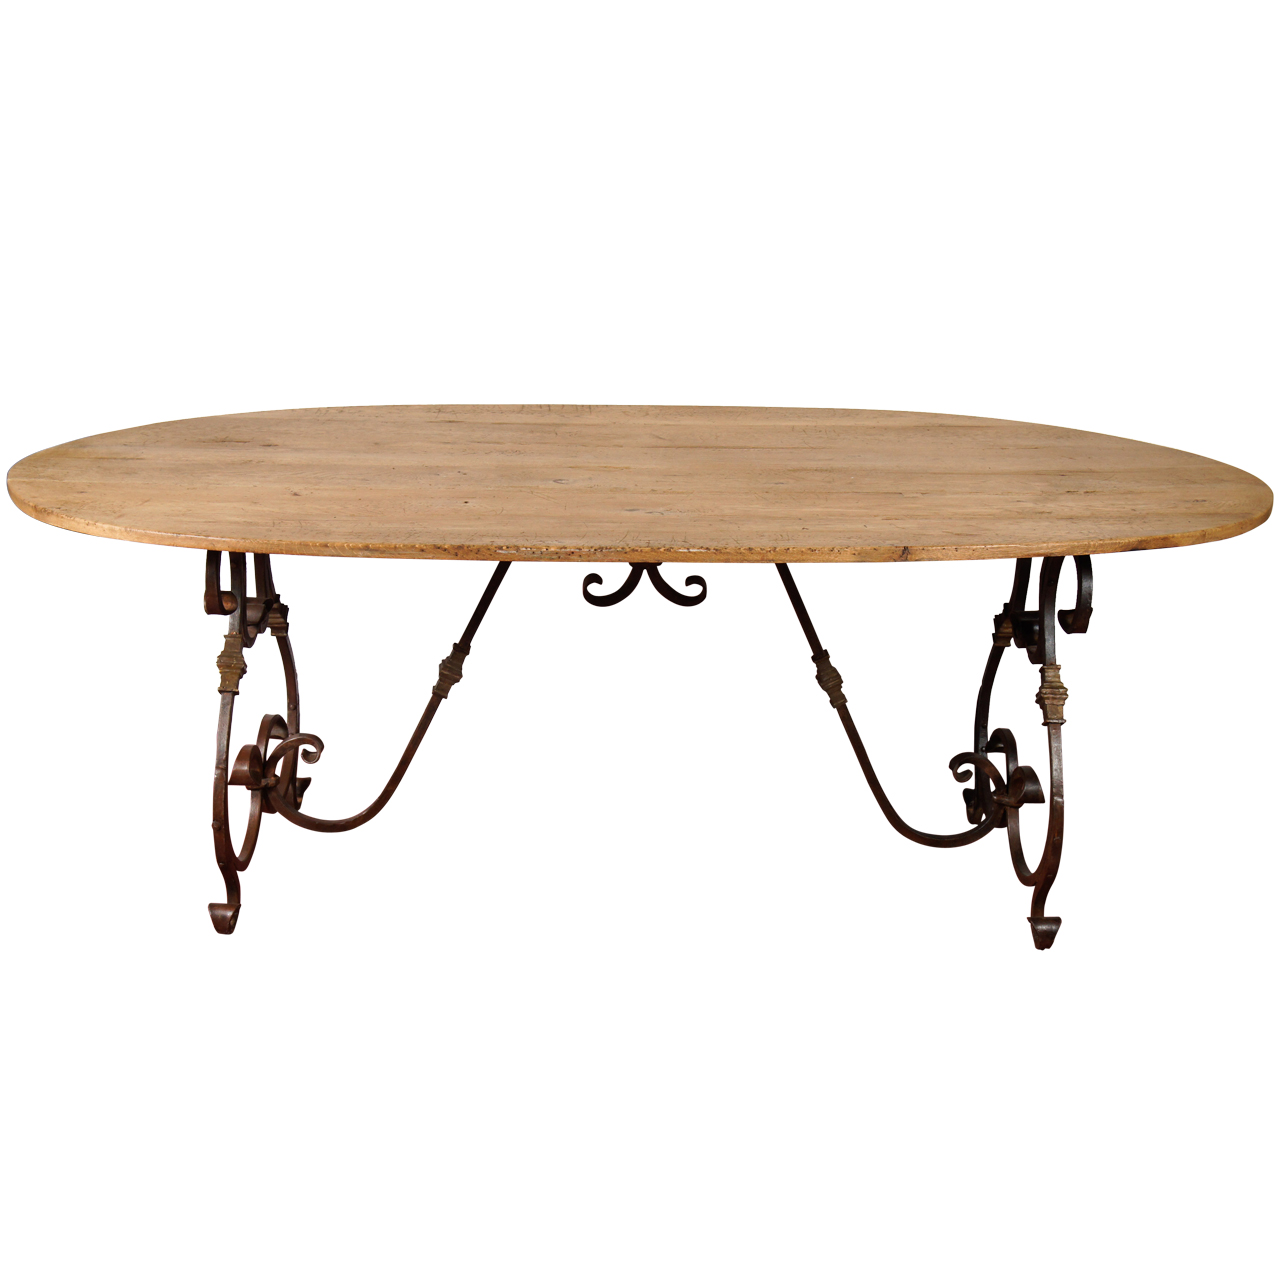 1280x1280px 8 Fabulous Wrought Iron Dining Table Base Picture in Furniture